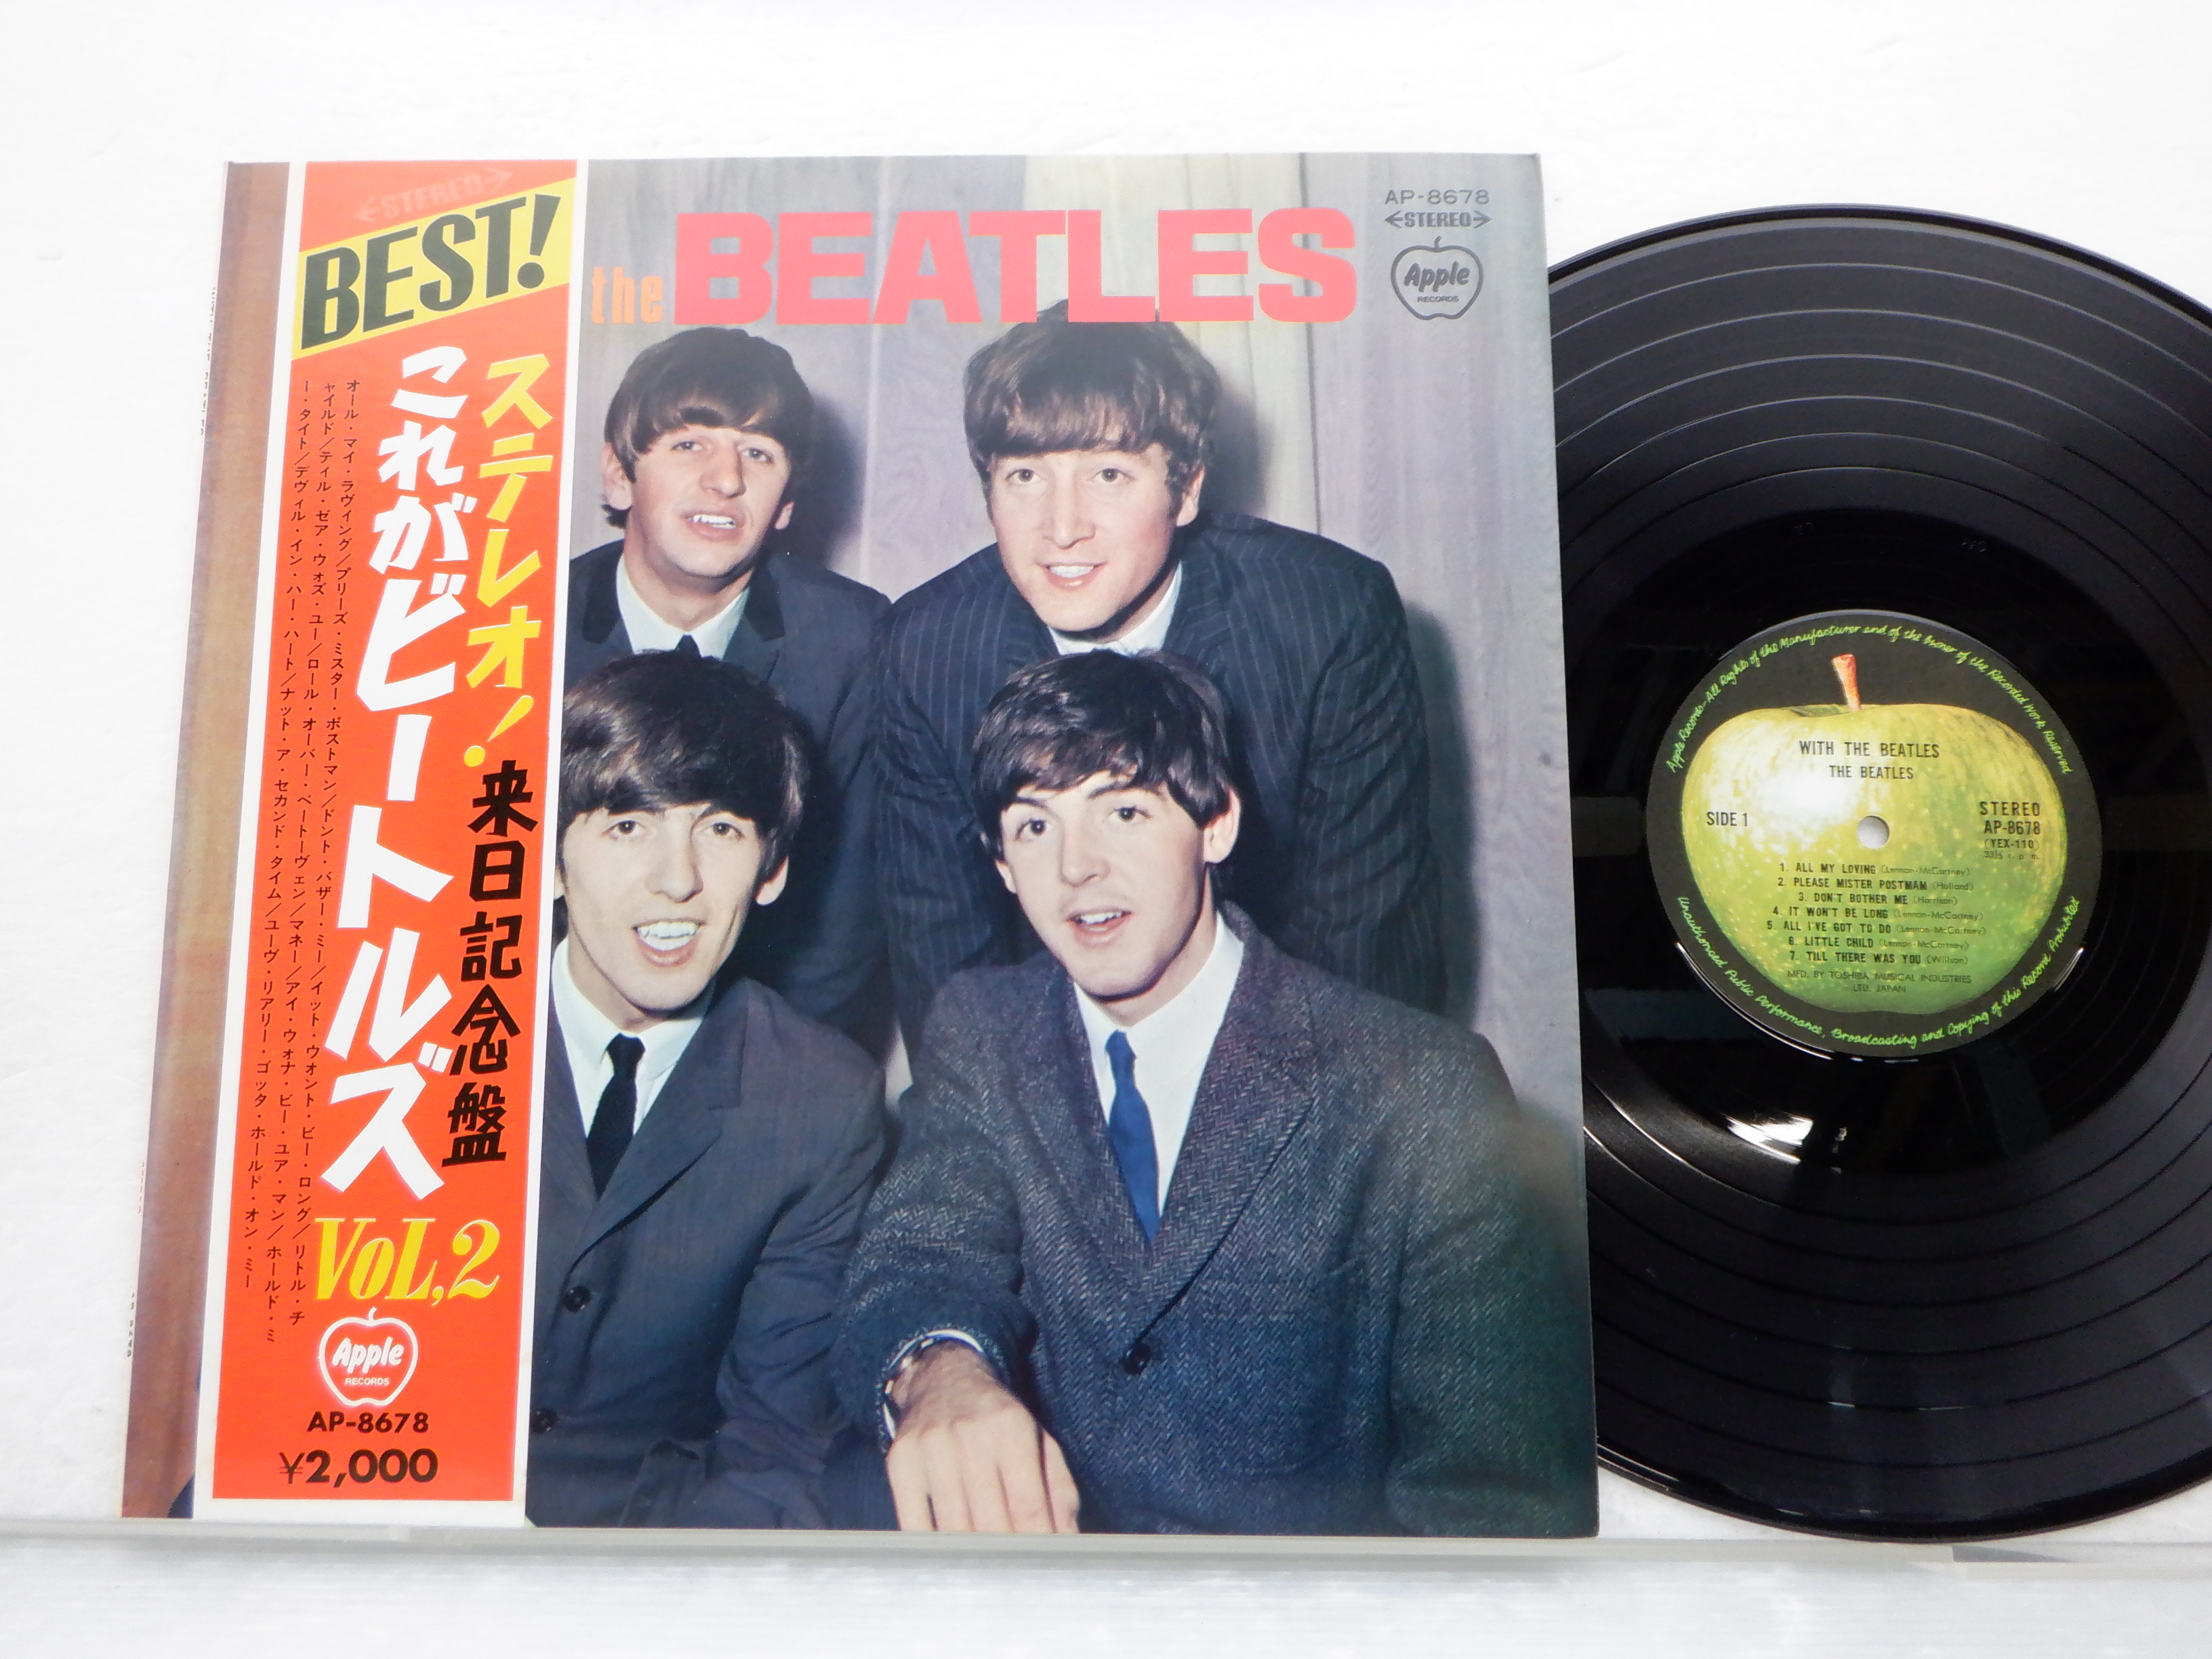 The Beatles(ビートルズ)「With The Beatles(ステレオ！ これが 